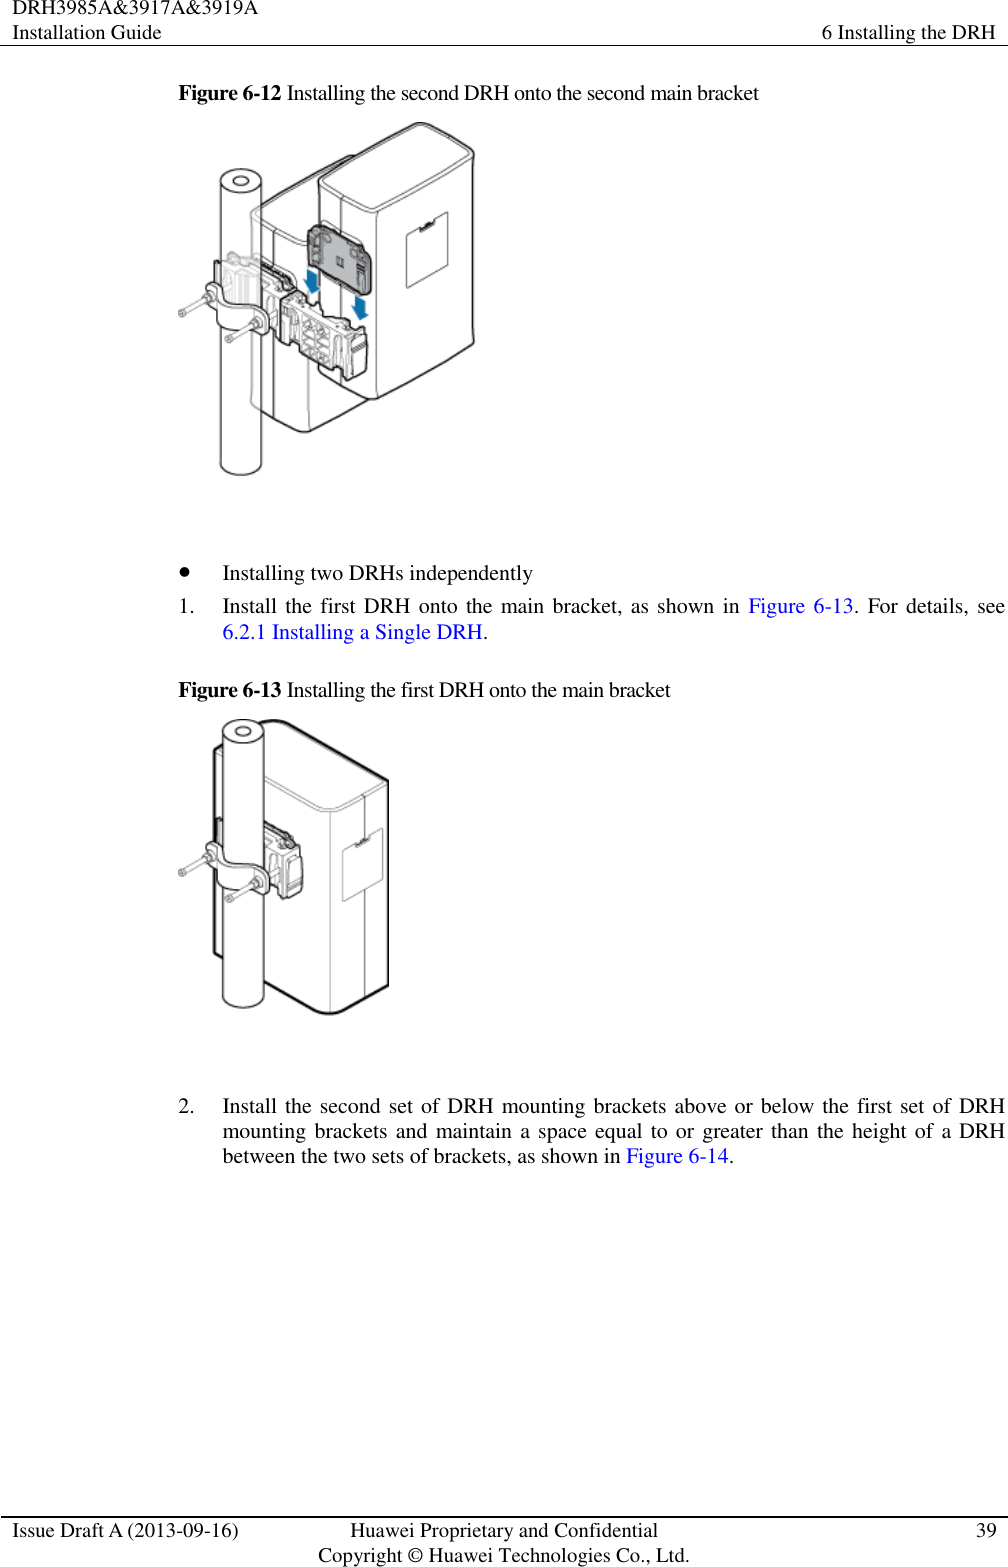 DRH3985A&amp;3917A&amp;3919A Installation Guide 6 Installing the DRH  Issue Draft A (2013-09-16) Huawei Proprietary and Confidential                                     Copyright © Huawei Technologies Co., Ltd. 39  Figure 6-12 Installing the second DRH onto the second main bracket    Installing two DRHs independently 1. Install the first DRH onto the main bracket, as shown in  Figure 6-13. For details, see 6.2.1 Installing a Single DRH. Figure 6-13 Installing the first DRH onto the main bracket   2. Install the second set of DRH mounting brackets above or below the first set of DRH mounting brackets and maintain a space equal to or greater than the height of  a DRH between the two sets of brackets, as shown in Figure 6-14. 